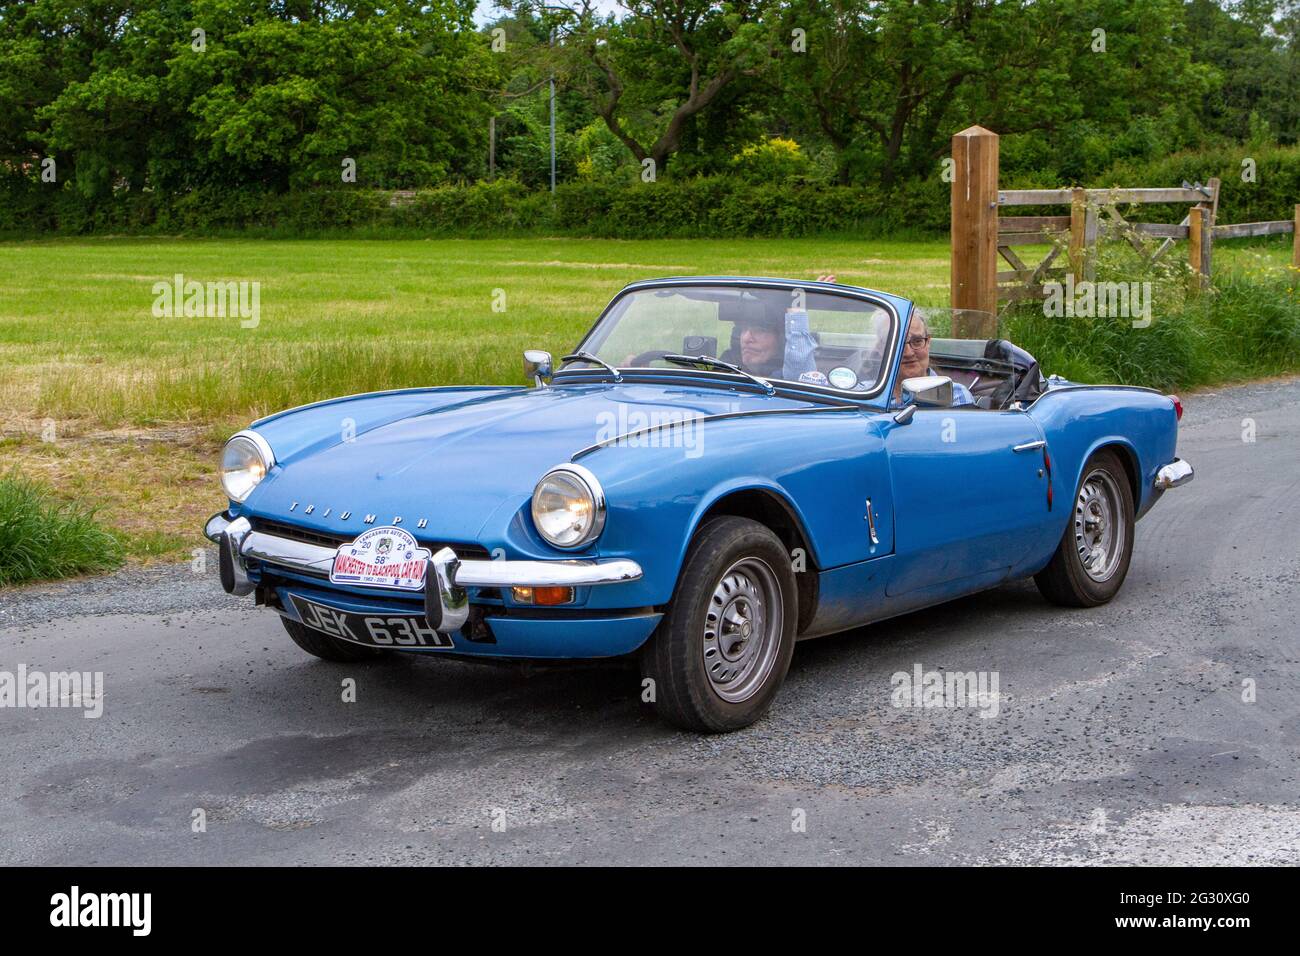 1970 70s blue Triumph Spitfire 1296cc at the 58th Annual Manchester to Blackpool Vintage & Classic Car Run The event is a ‘Touring Assembly’ Stock Photo